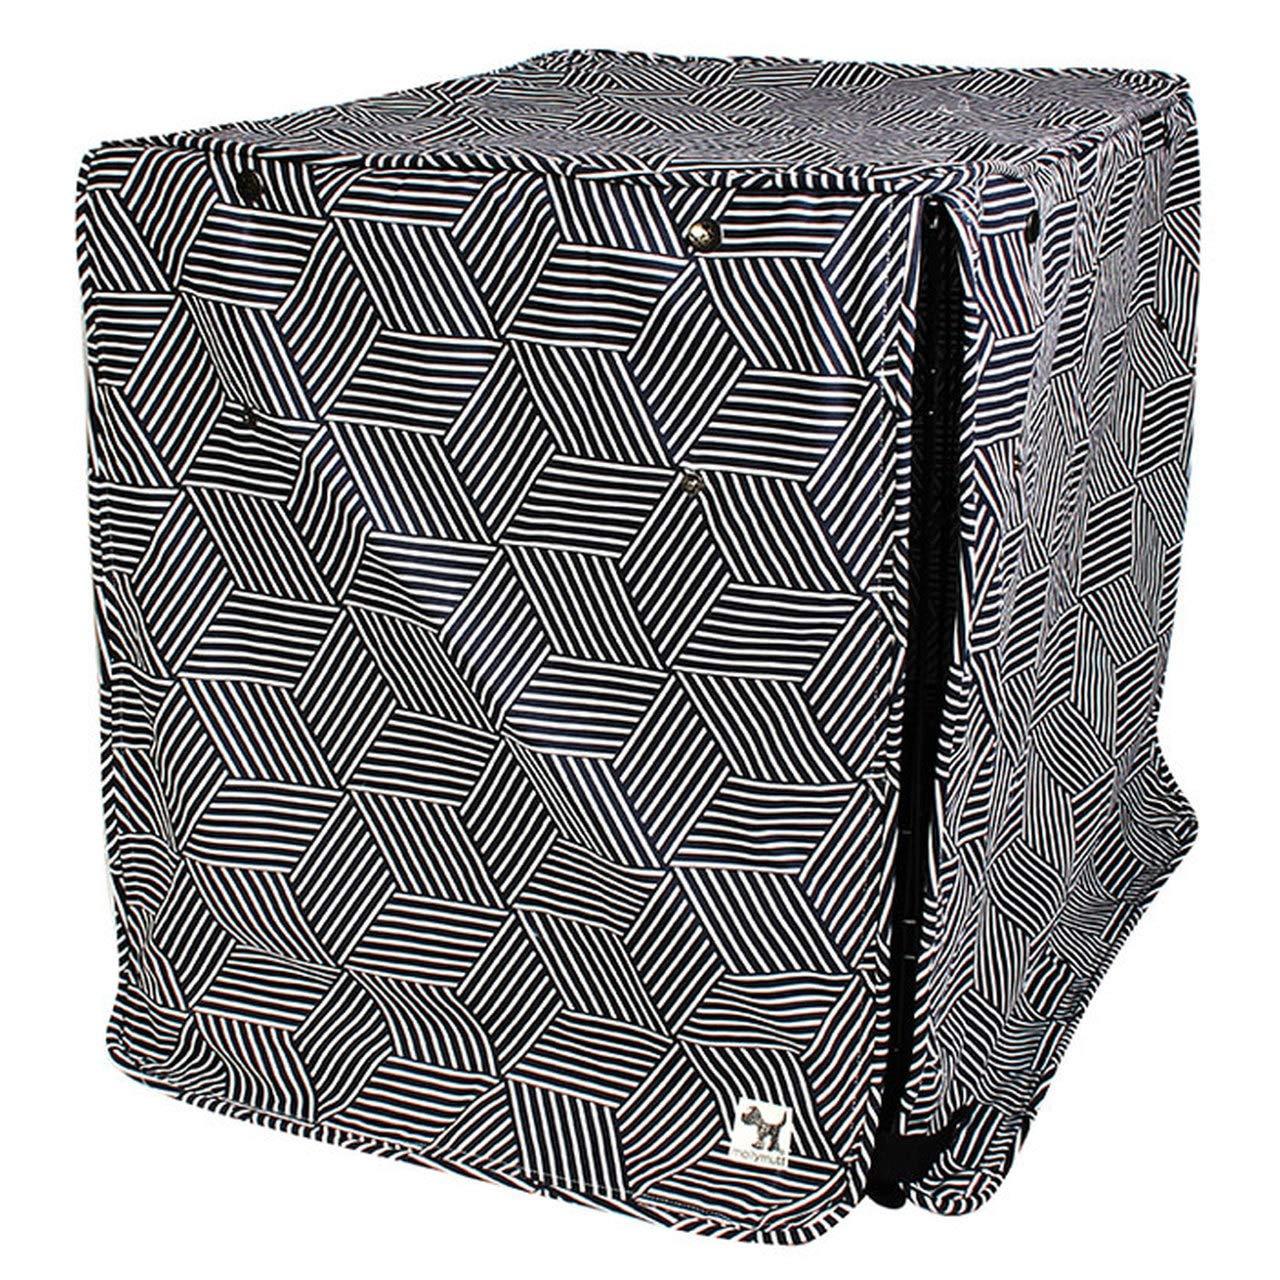 Rough Gem 30-inch Dog Crate Cover, Molly Mutt Medium Kennel Cover Measures 30